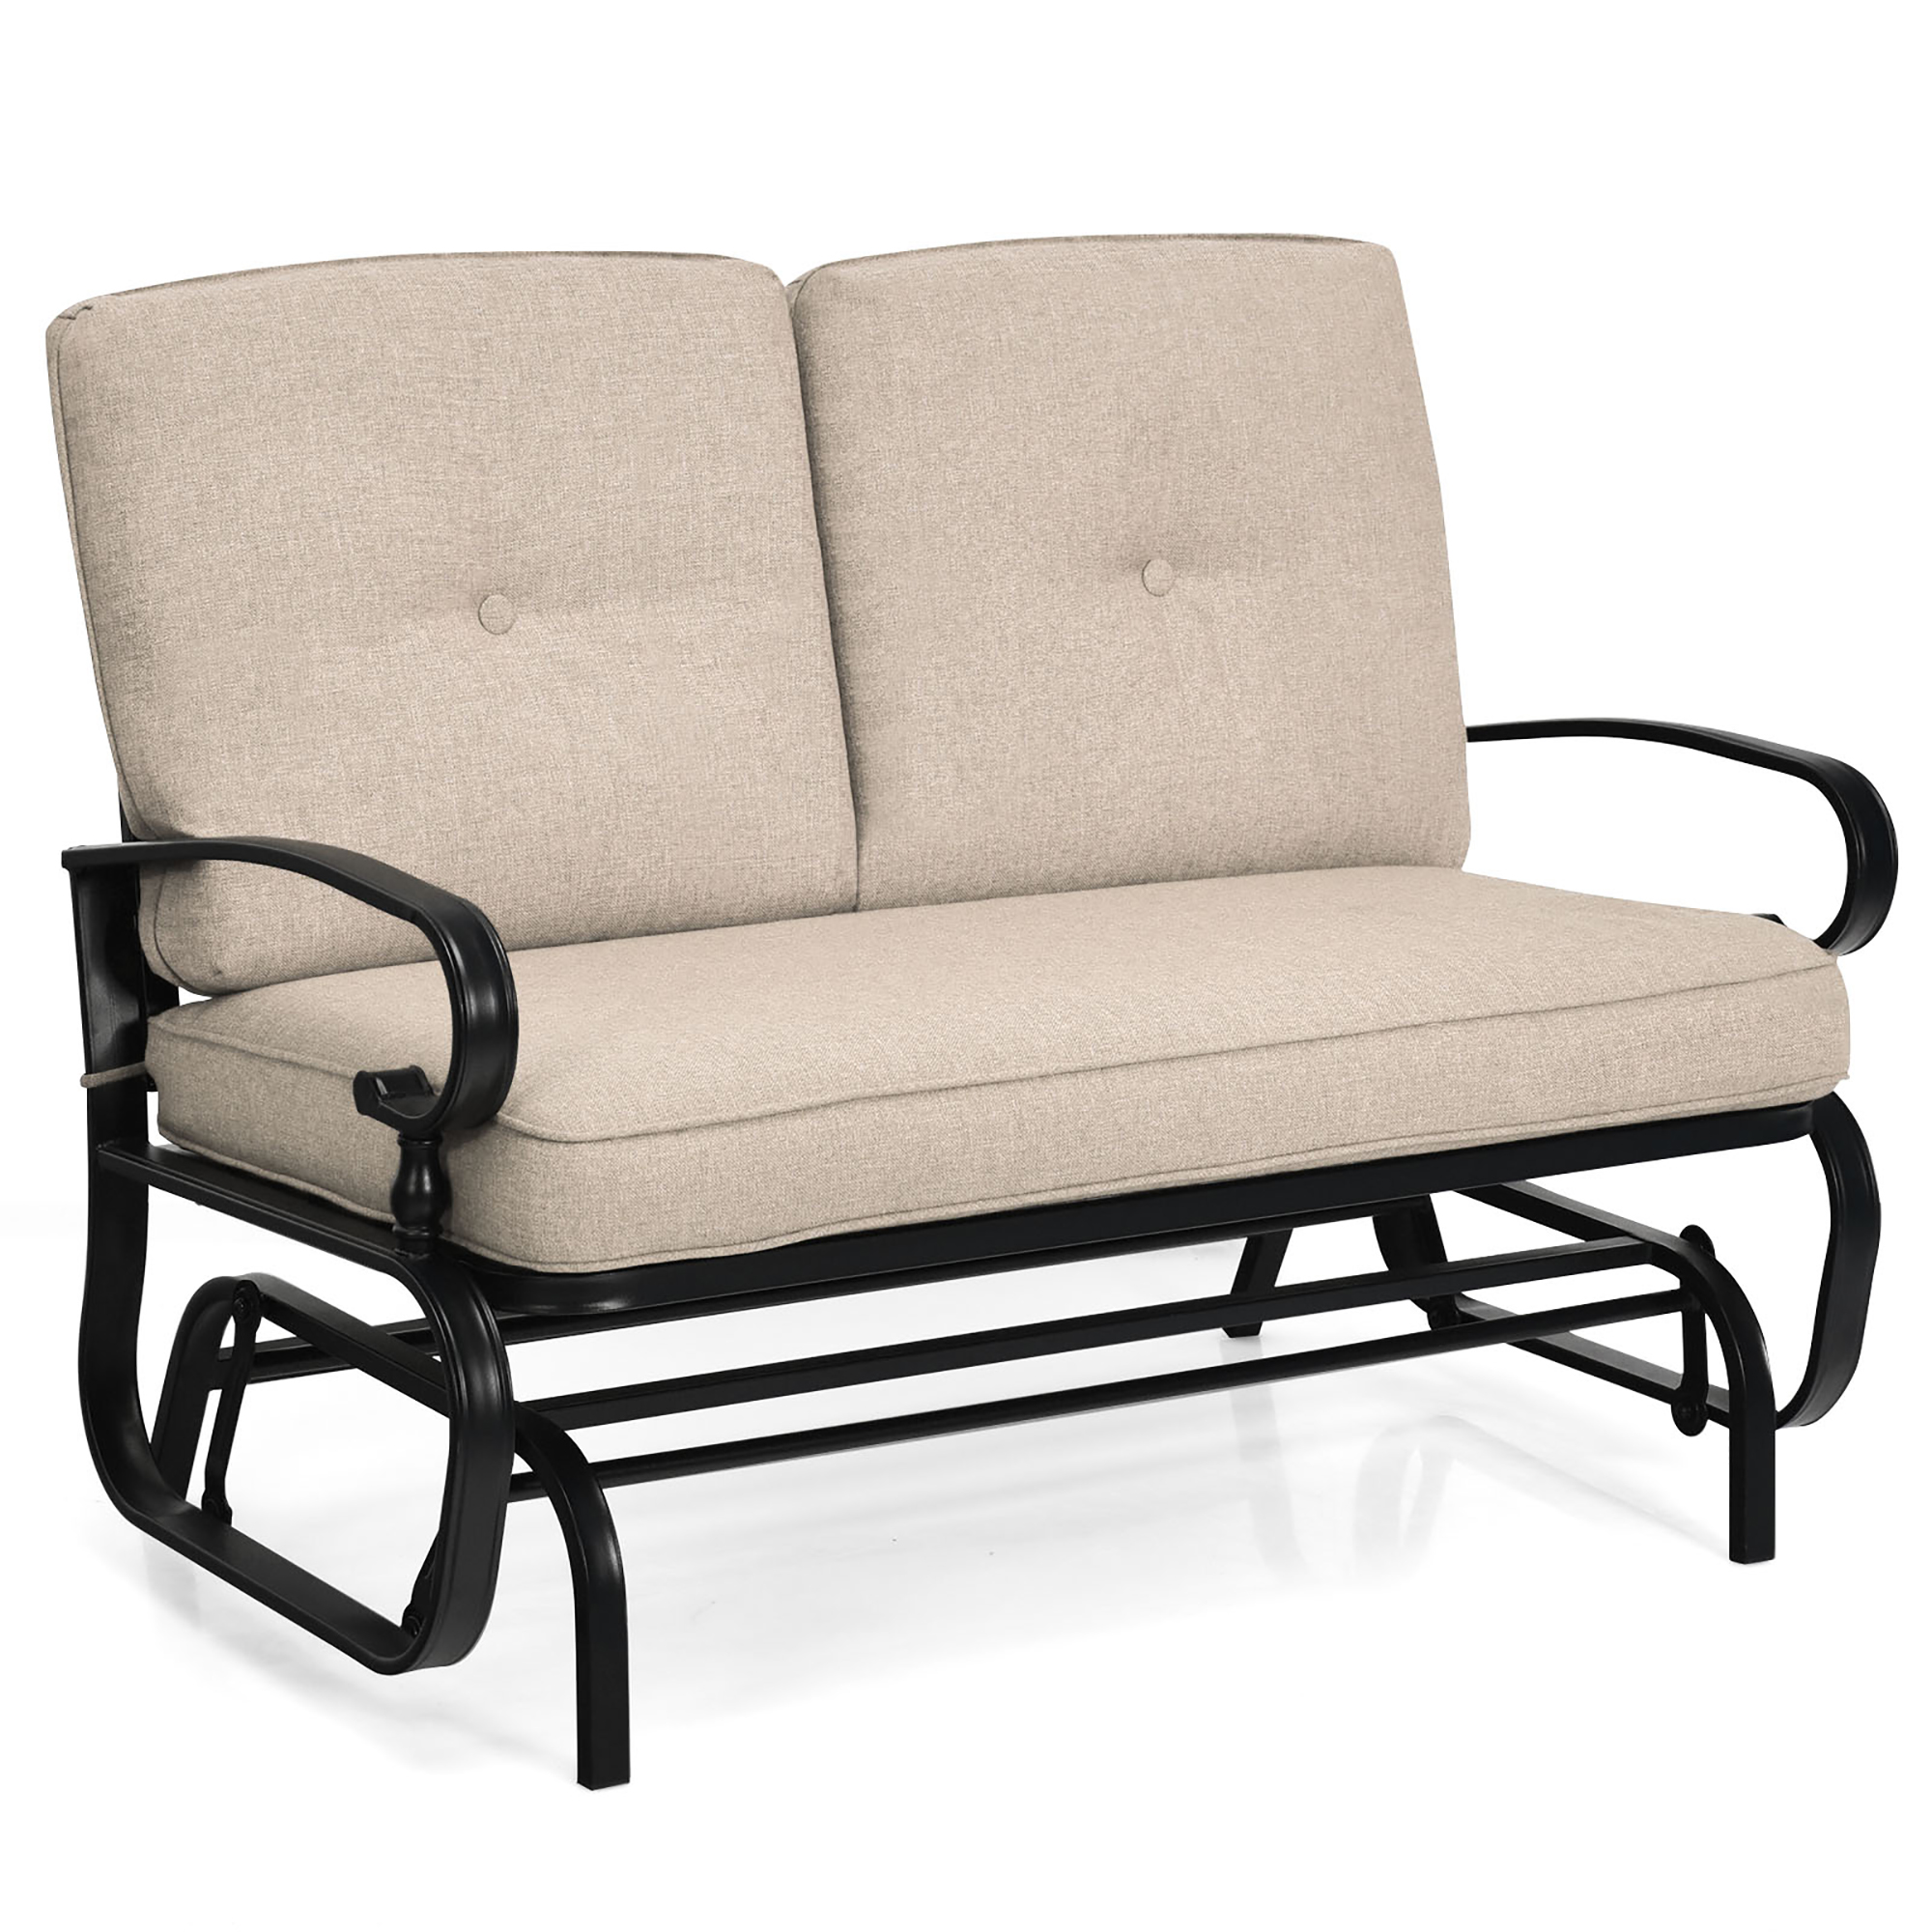 Costway 2-Person Outdoor Swing Glider Chair Bench Loveseat Cushioned Sofa - image 4 of 10